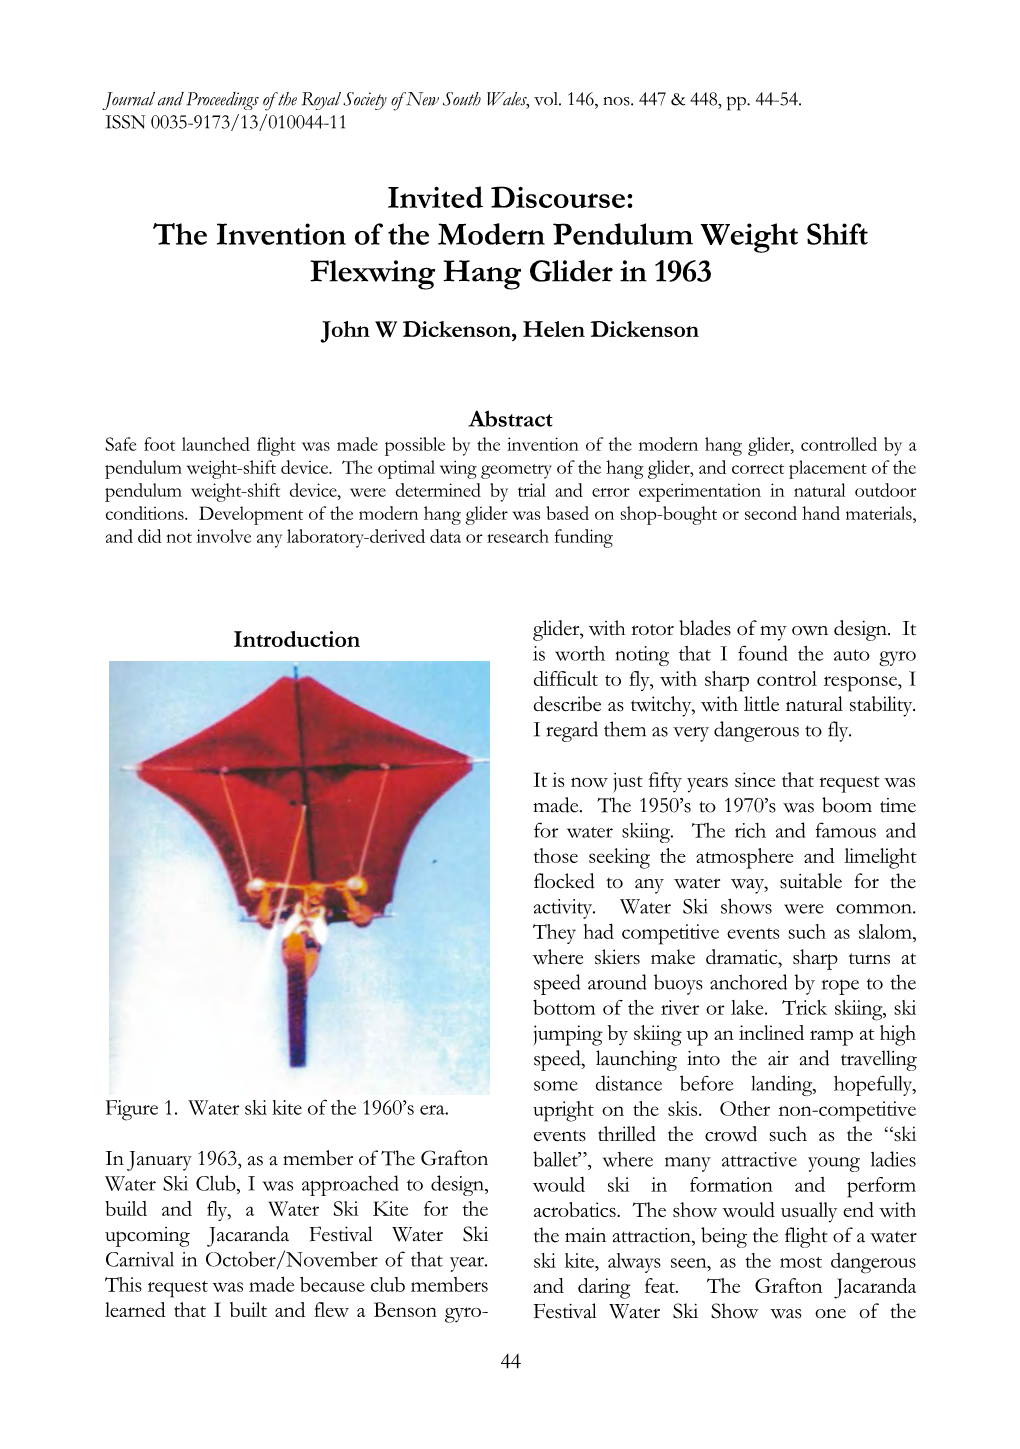 The Invention of the Modern Pendulum Weight Shift Flexwing Hang Glider in 1963